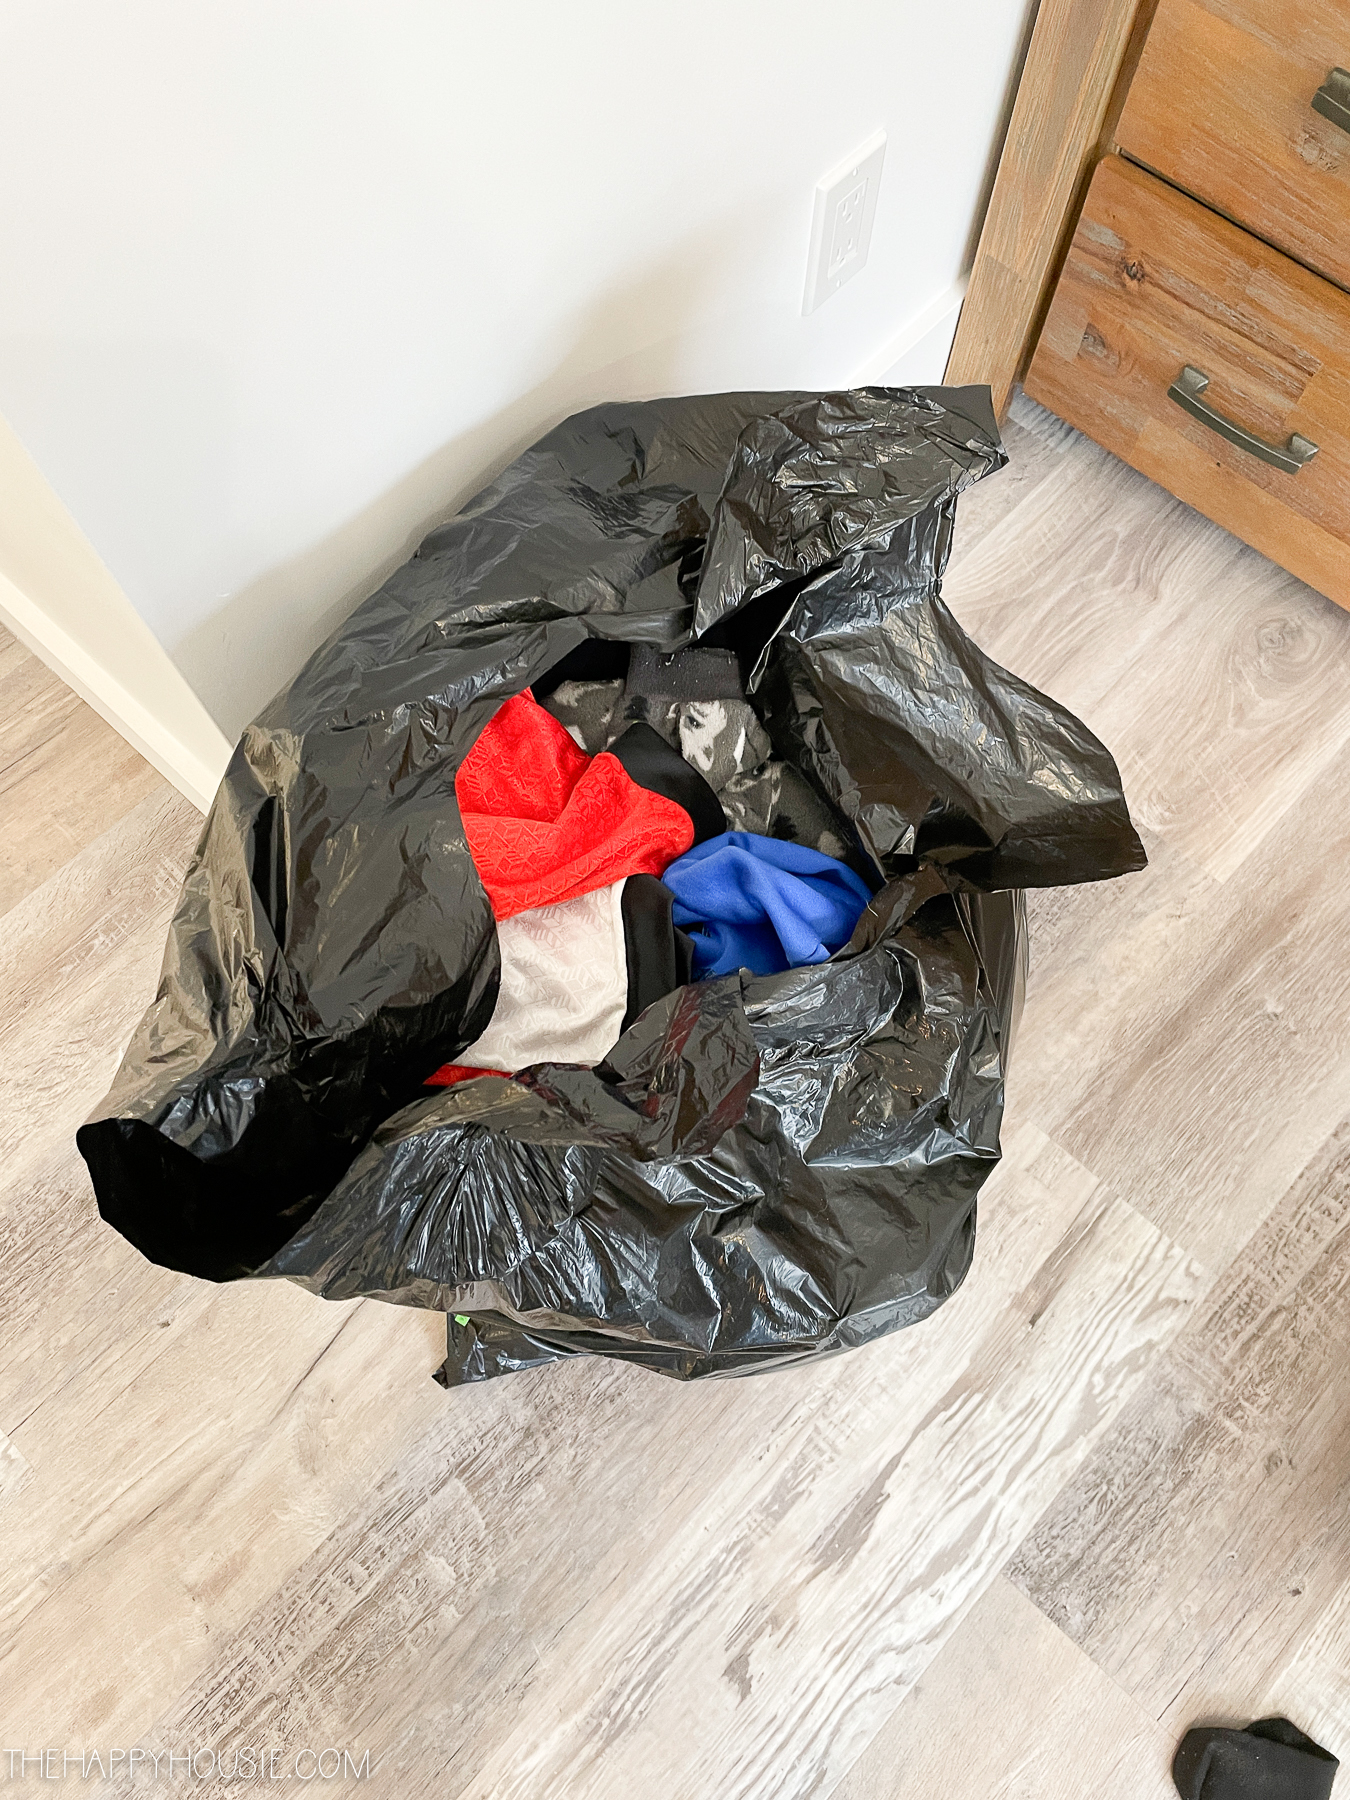 room organization ideas picture of garbage bag full of clothes ready to donate